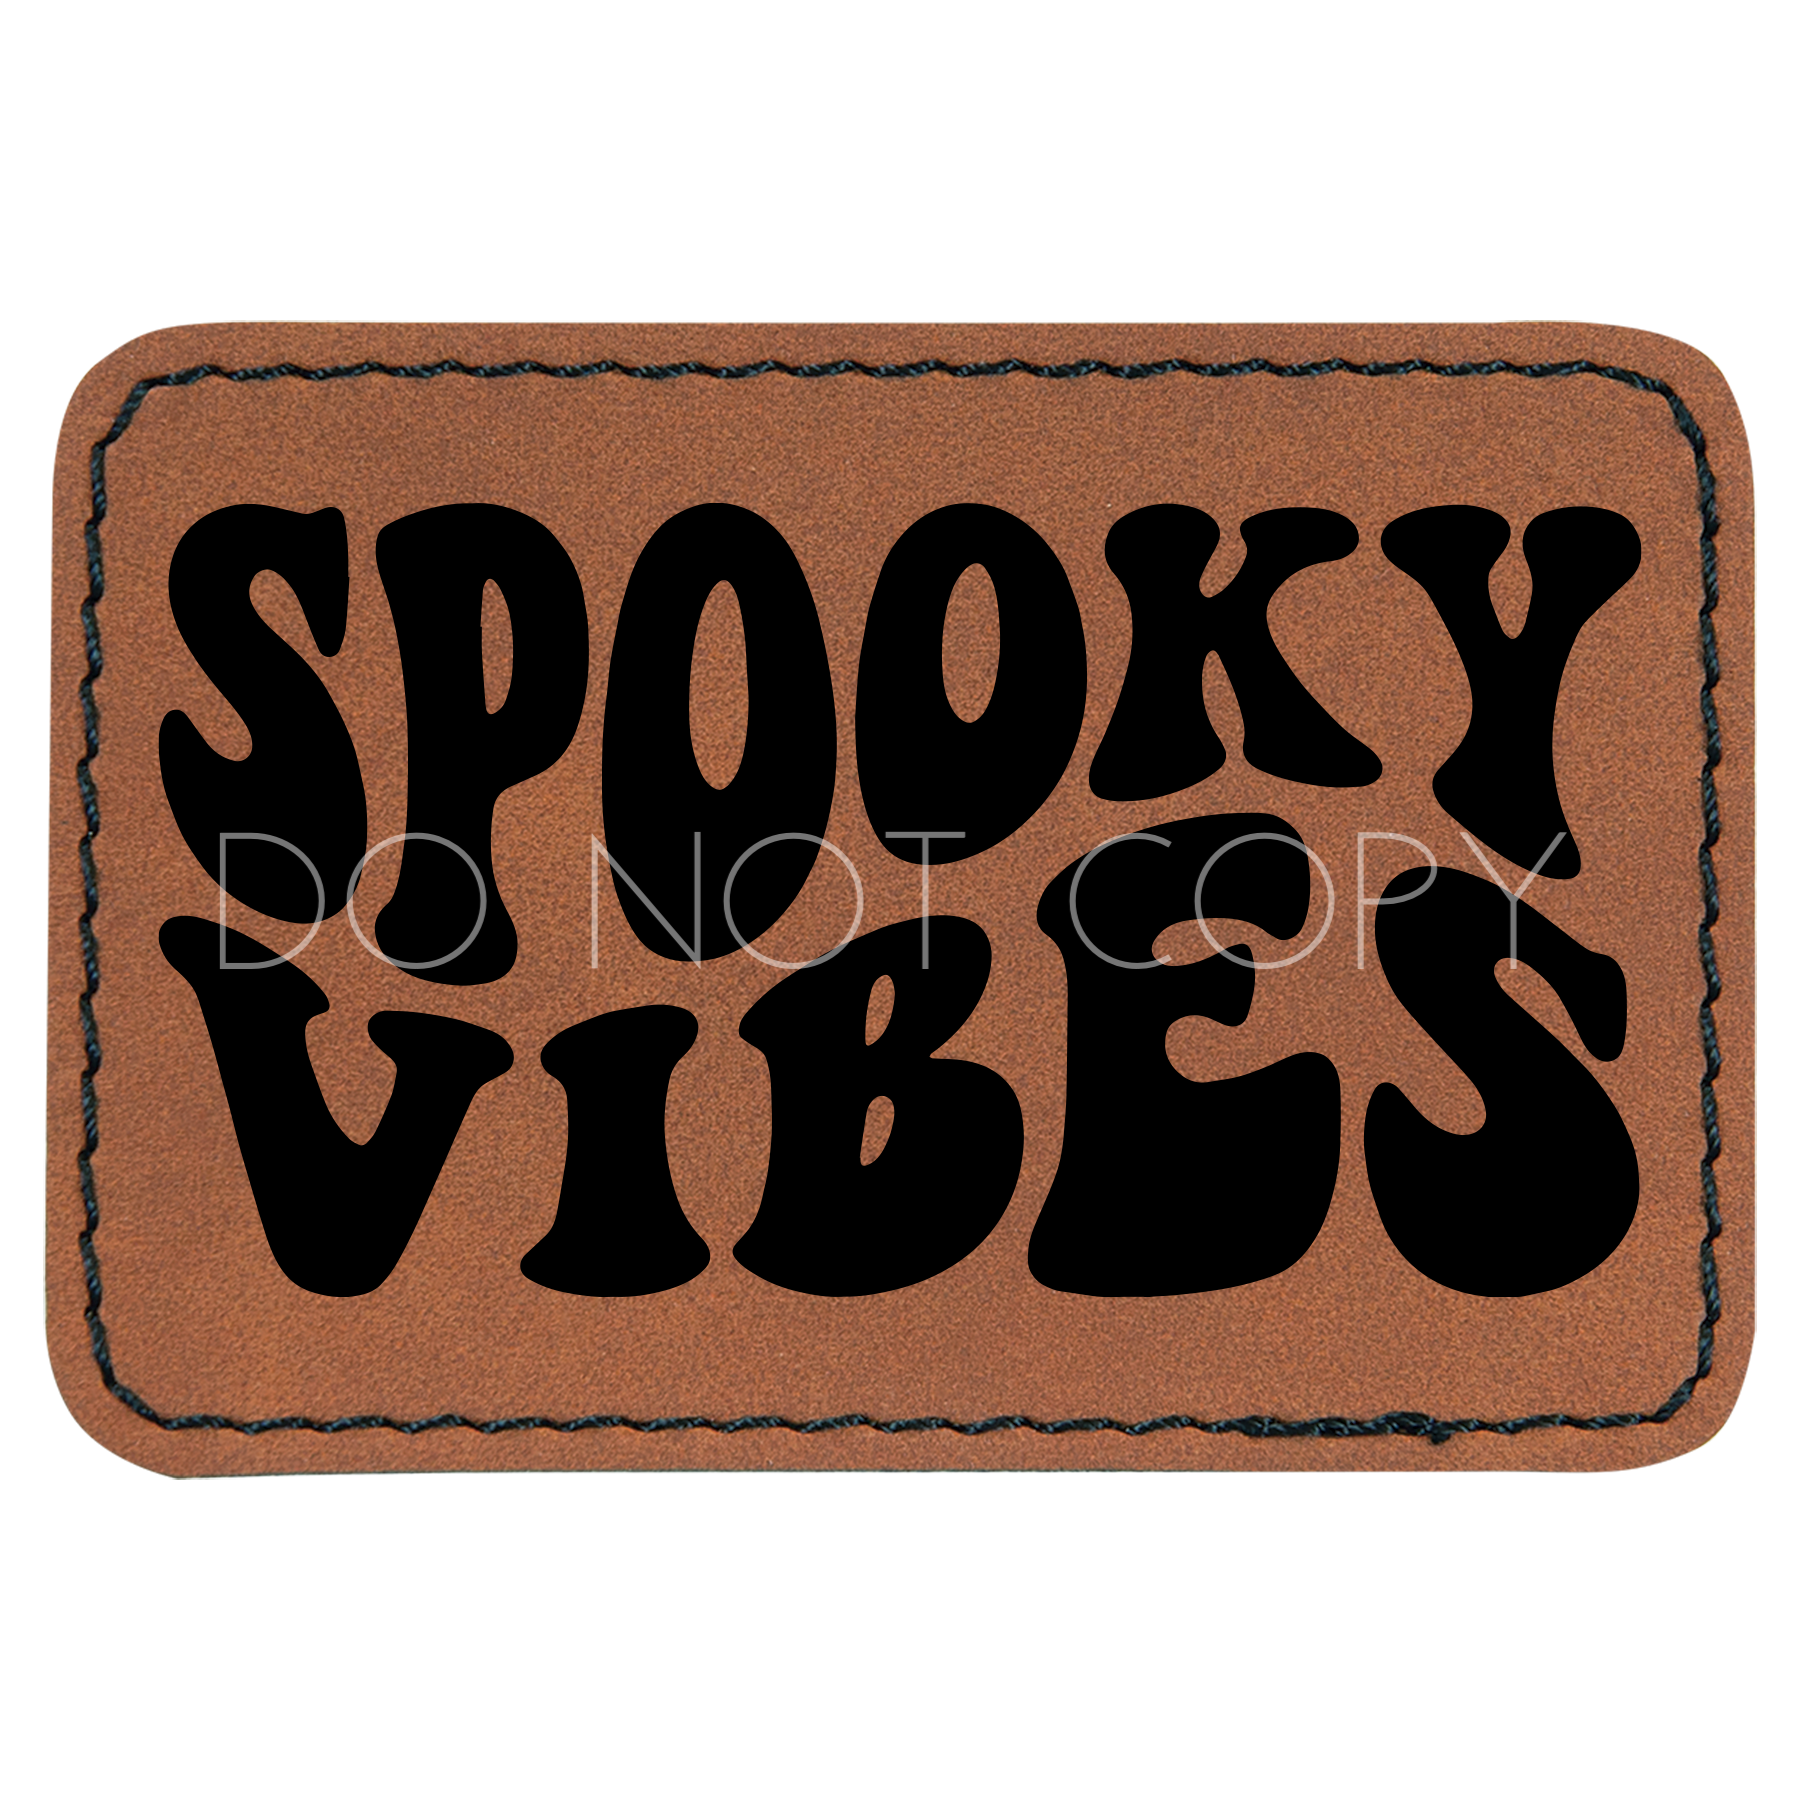 Spooky Vibes Patch